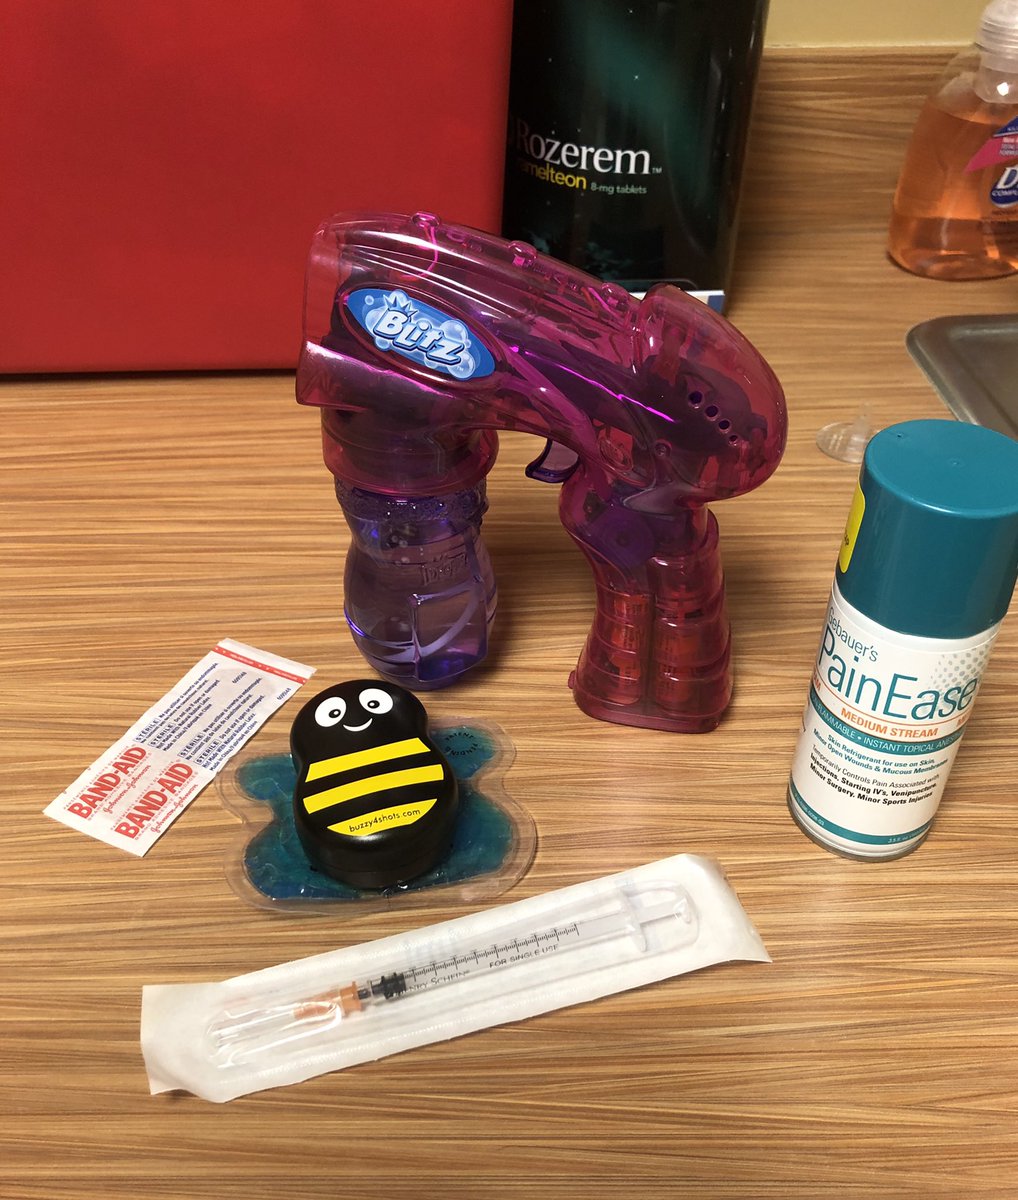 An amazing Friday at work is when you get to help a child with severe needle phobia successfully cope with an injection so he can begin much needed interventions to manage asthma symptoms. #itdoesnthavetohurt #ThisIsPedsPsych #buzzy4shots